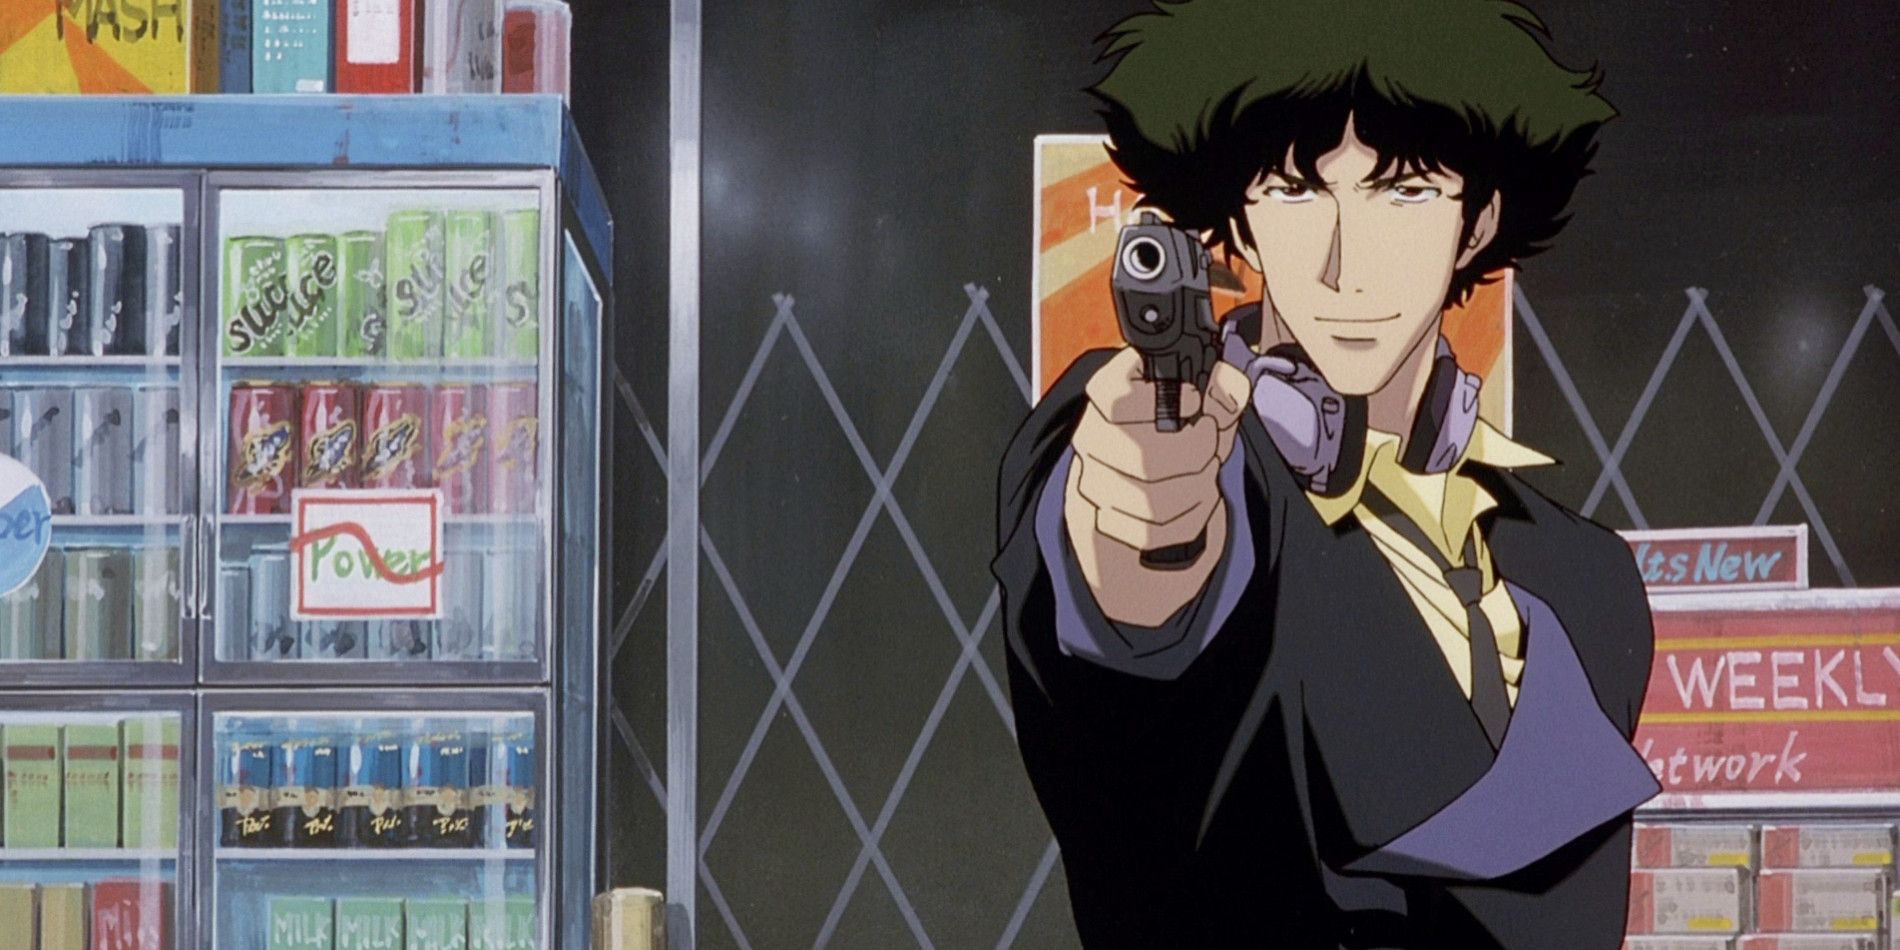 Spike points a gun in a store in Cowboy Bebop: The Movie.